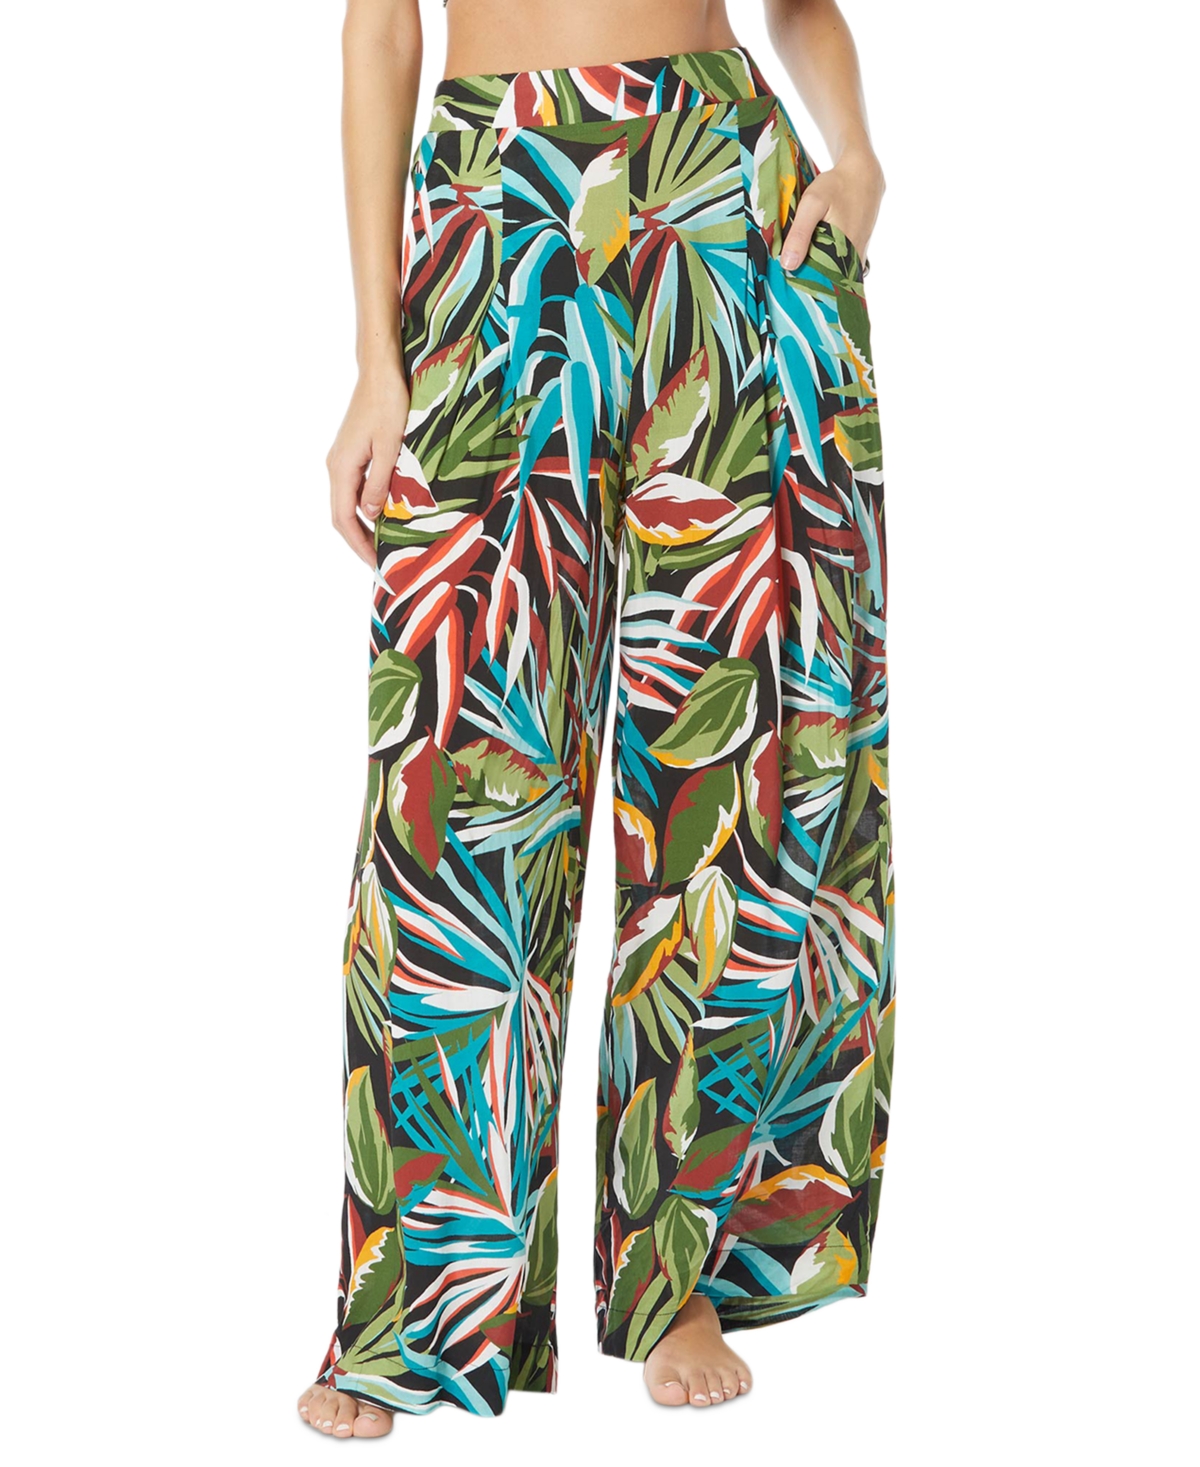 Women's Printed Wide-Leg Cover-Up Pants - Multi